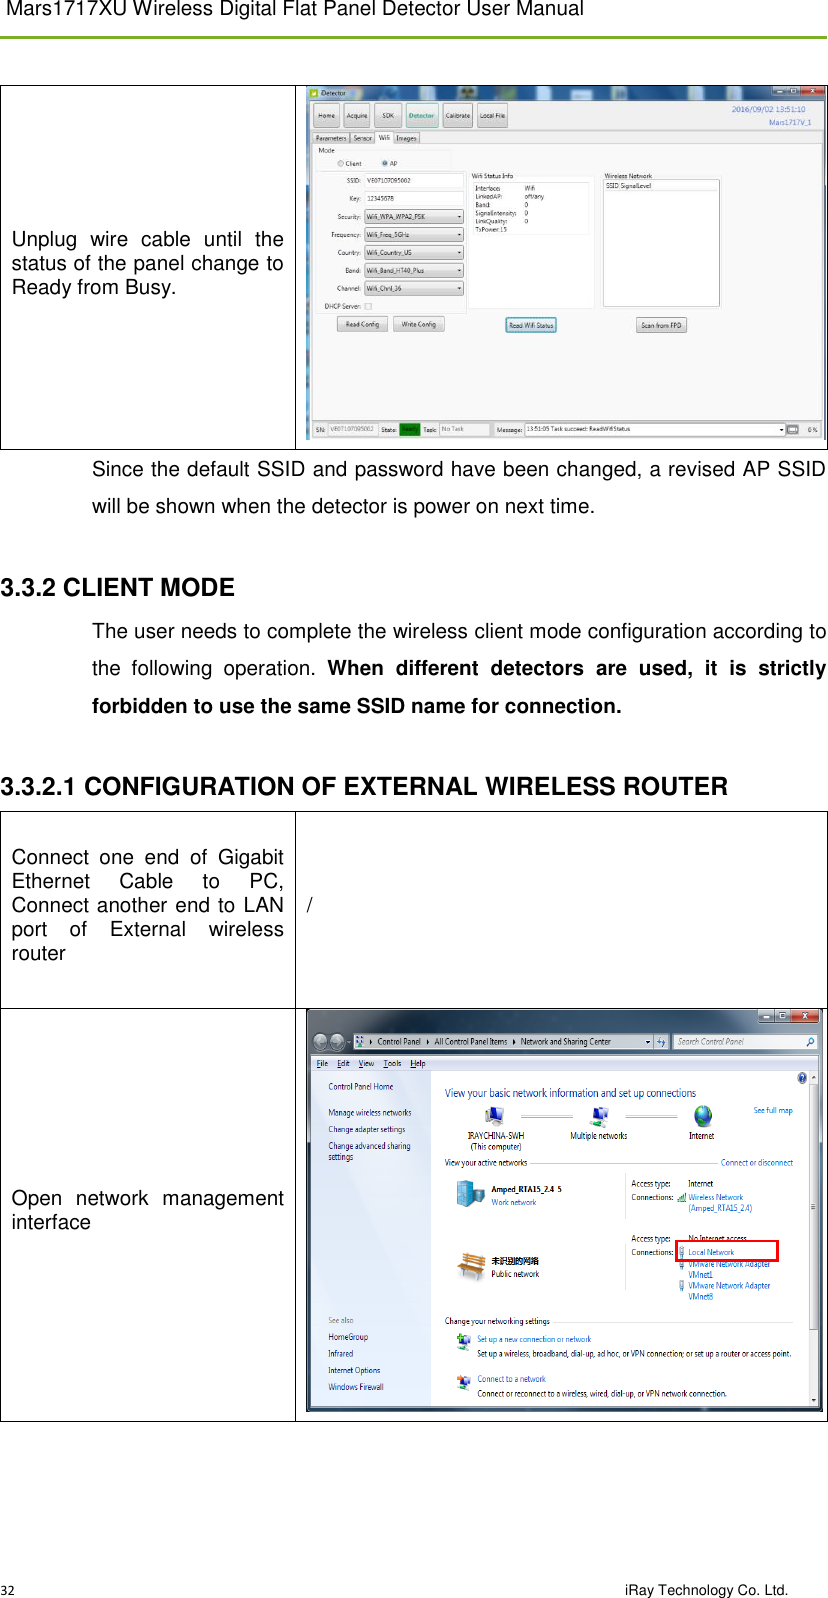  Mars1717XU Wireless Digital Flat Panel Detector User Manual 32                                                                                                                                                                                         iRay Technology Co. Ltd. Unplug  wire  cable  until  the status of the panel change to Ready from Busy.  Since the default SSID and password have been changed, a revised AP SSID will be shown when the detector is power on next time.  3.3.2 CLIENT MODE The user needs to complete the wireless client mode configuration according to the  following  operation.  When  different  detectors  are  used,  it  is  strictly forbidden to use the same SSID name for connection.  3.3.2.1 CONFIGURATION OF EXTERNAL WIRELESS ROUTER  Connect  one  end  of  Gigabit Ethernet  Cable  to  PC, Connect another end to LAN port  of  External  wireless router  / Open  network  management interface  